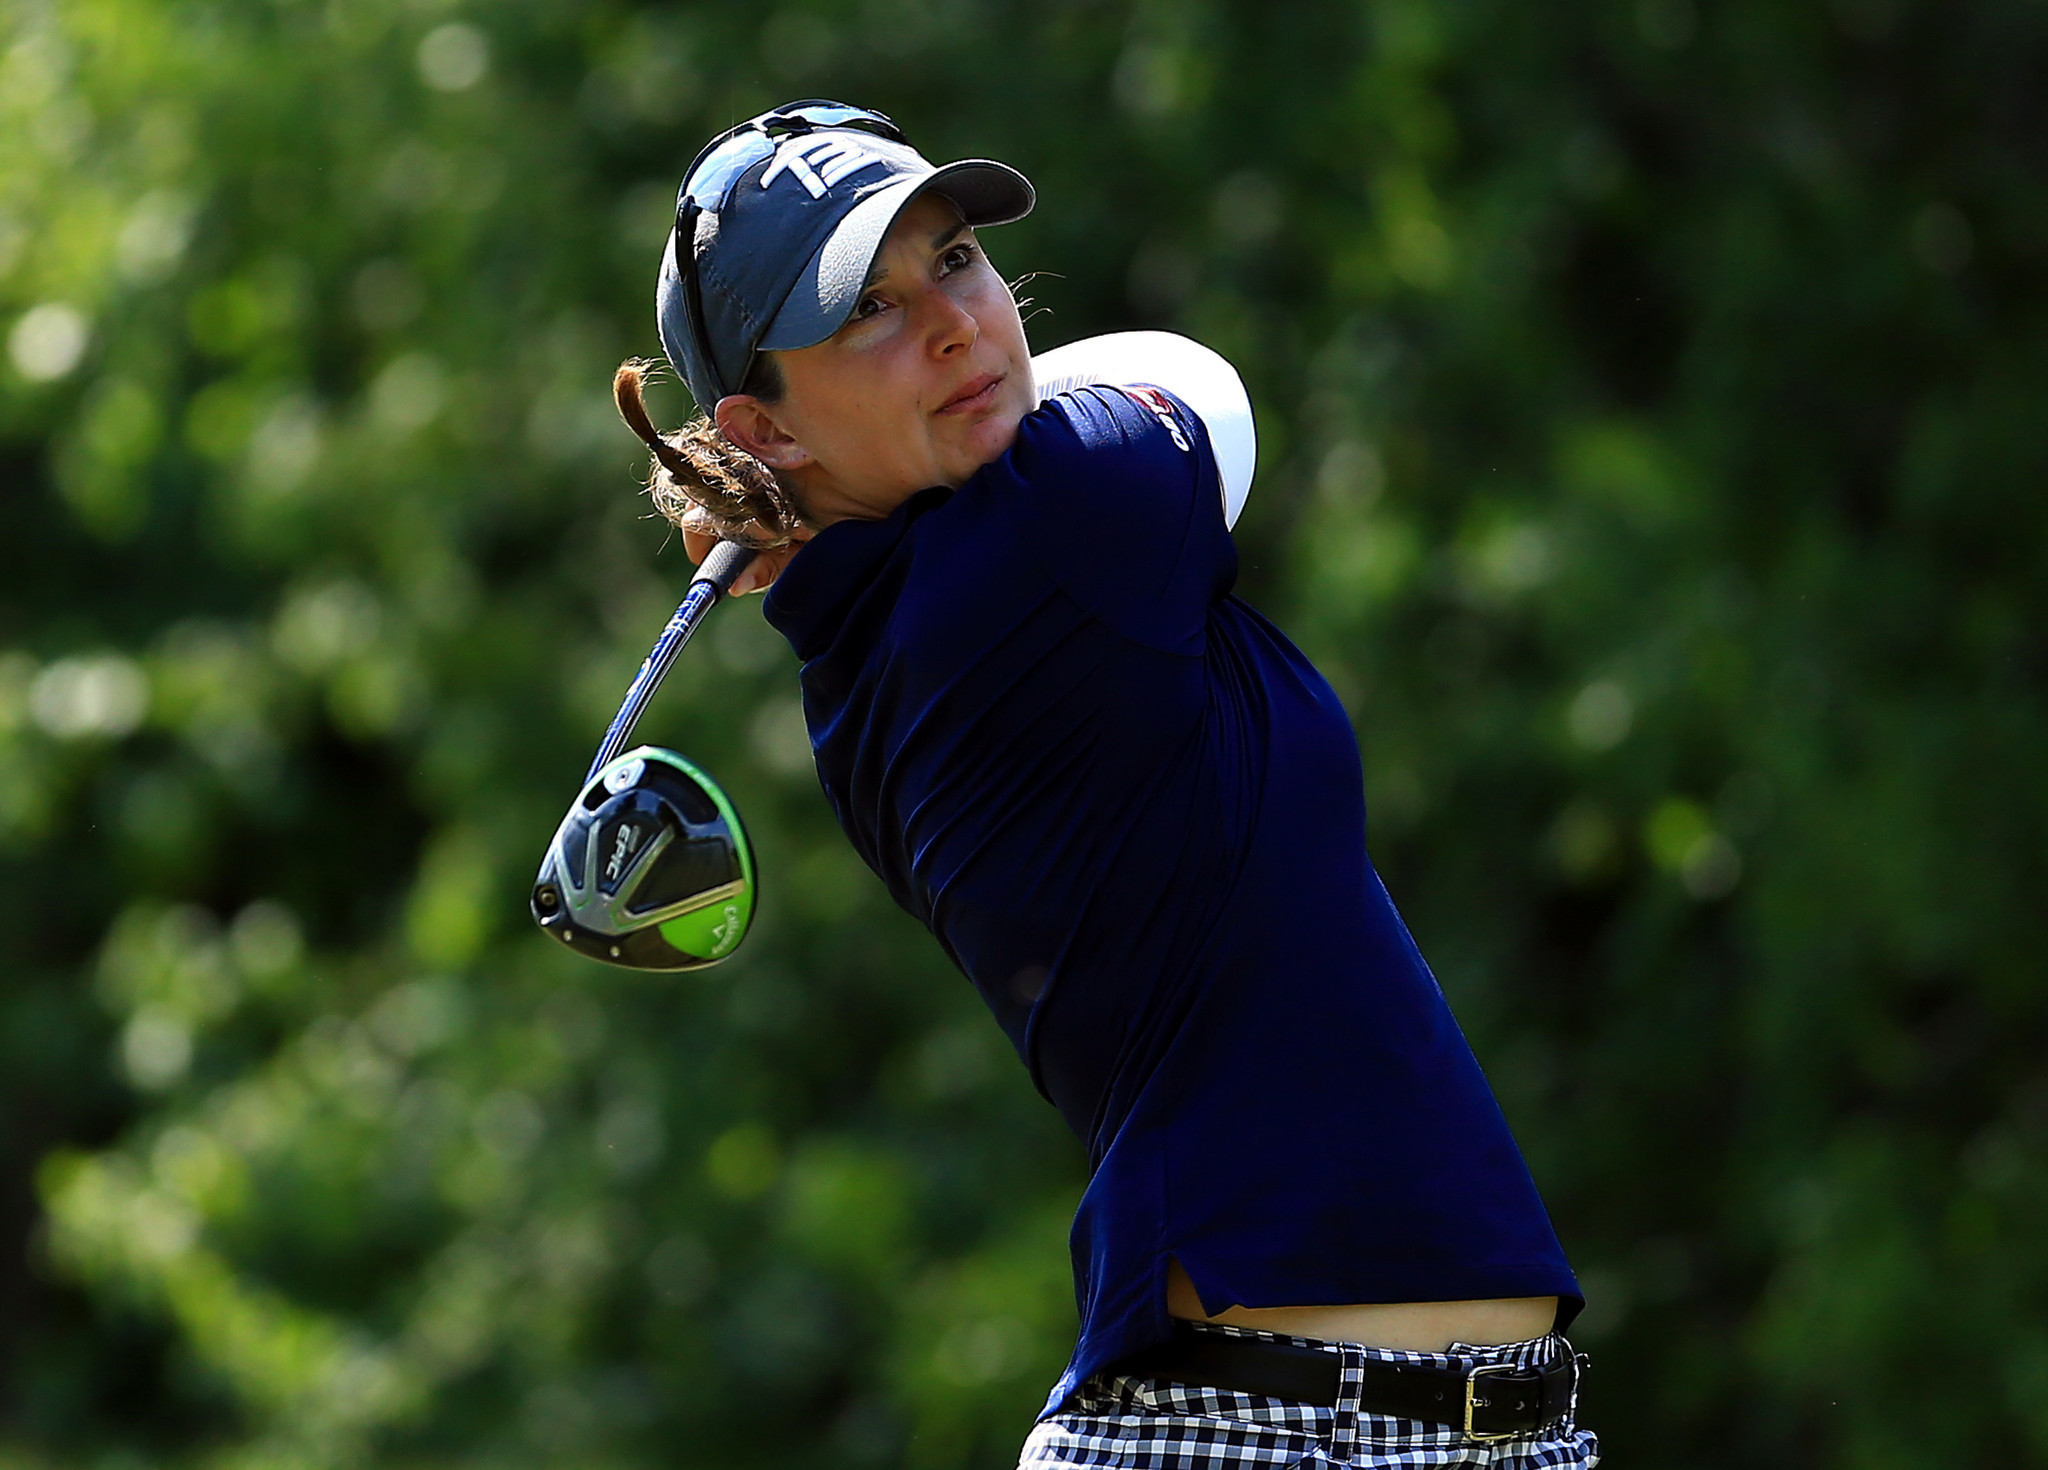 South Floridian Lindy Duncan starting to feel at home on LPGA Tour - Sun Sentinel2048 x 1470